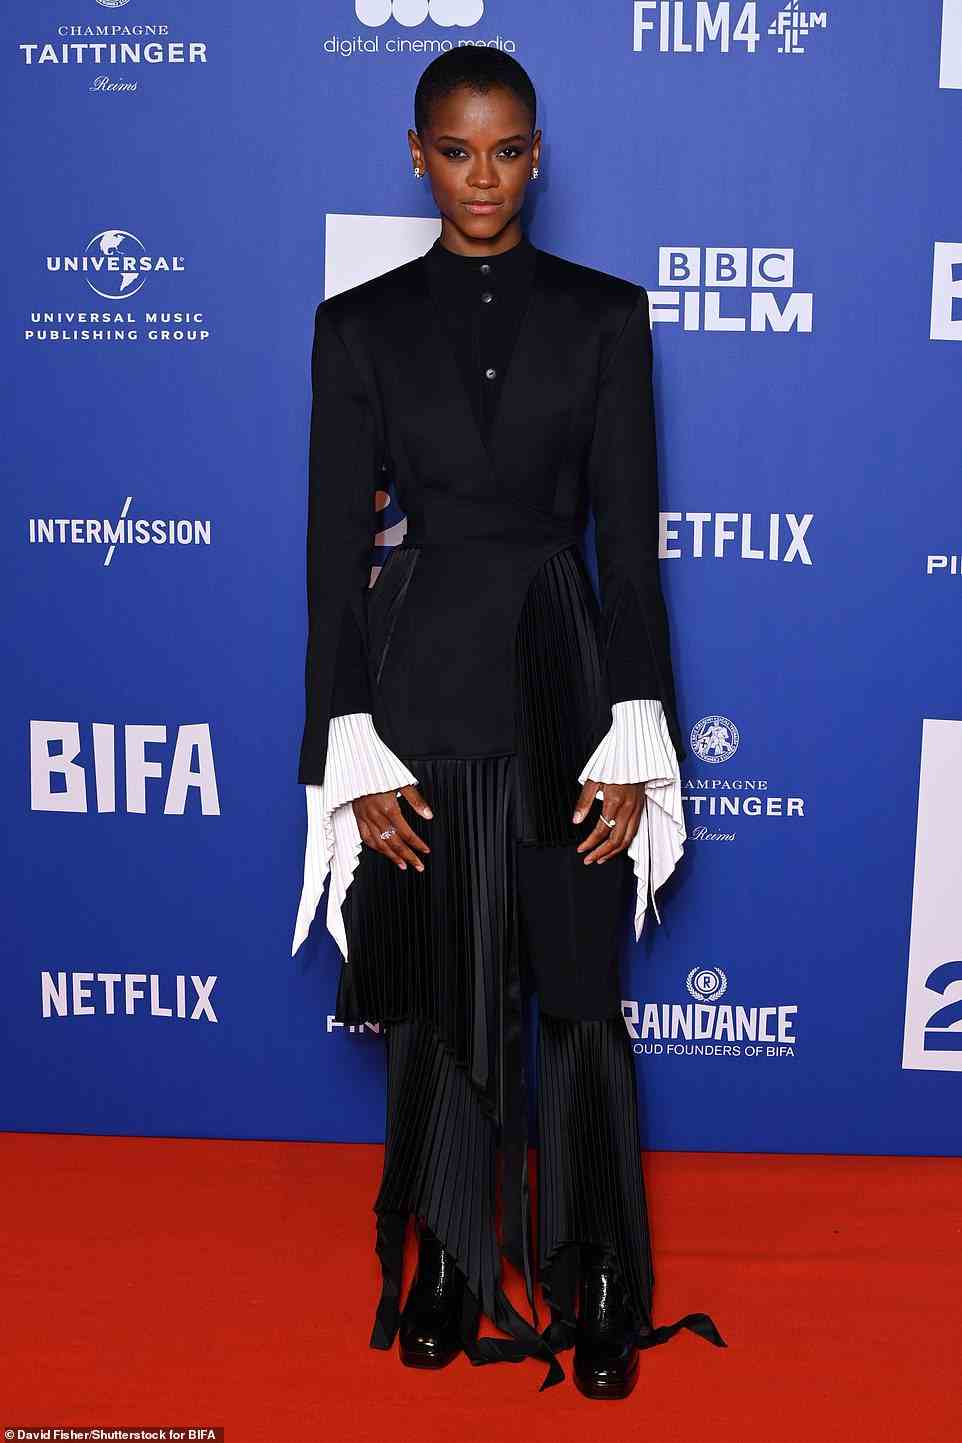 Edgy style credentials: Letitia Wright showed off her edgy sense of style as she wore a black dress with crimped white cuffs